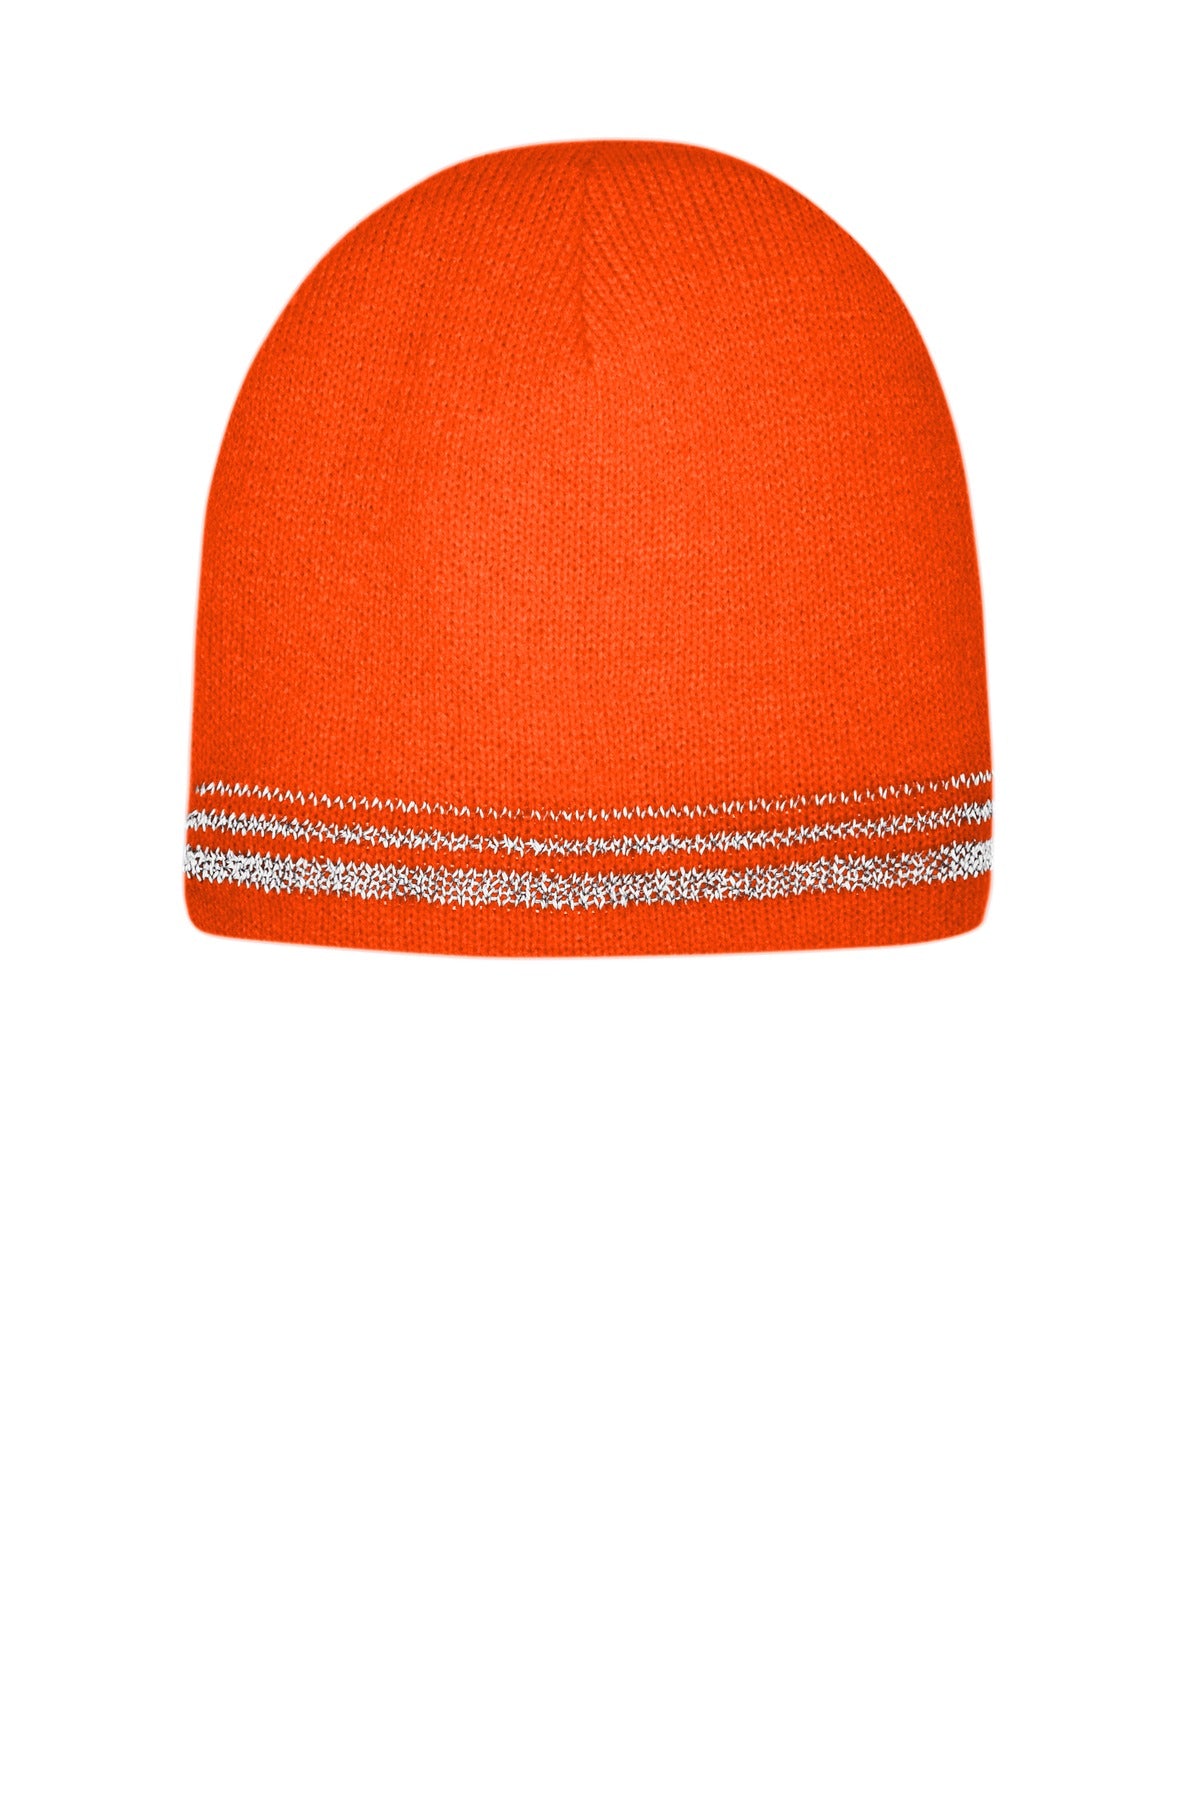 CornerStone ®  Lined Enhanced Visibility with Reflective Stripes Beanie CS804